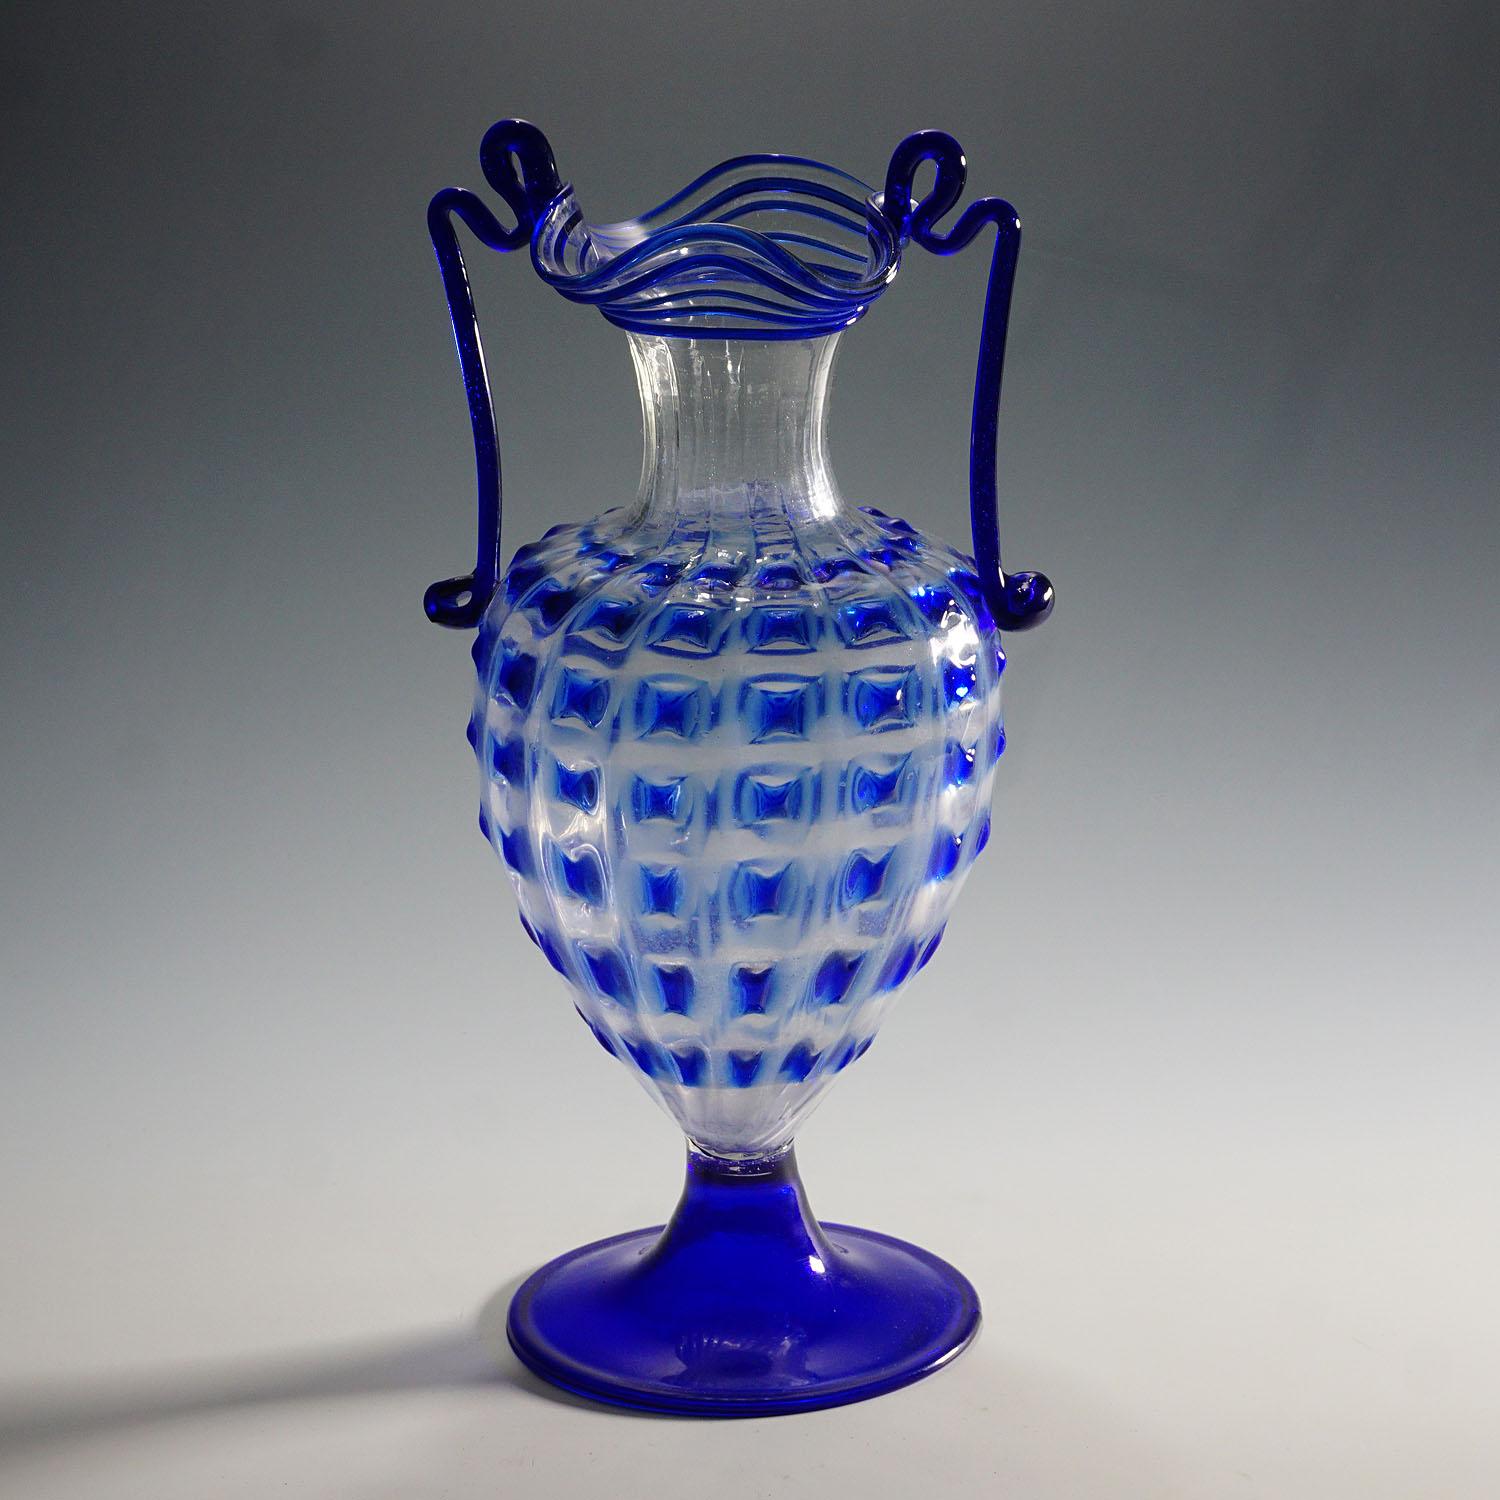 Large Fratelli Toso Amphora vase ca. 1930.

A large Murano soffiato art glass glass vase, manufactured by Vetreria Fratelli Toso early 20th century. The vase is executed with clear glass with applications and handles in blue. An authentic example of